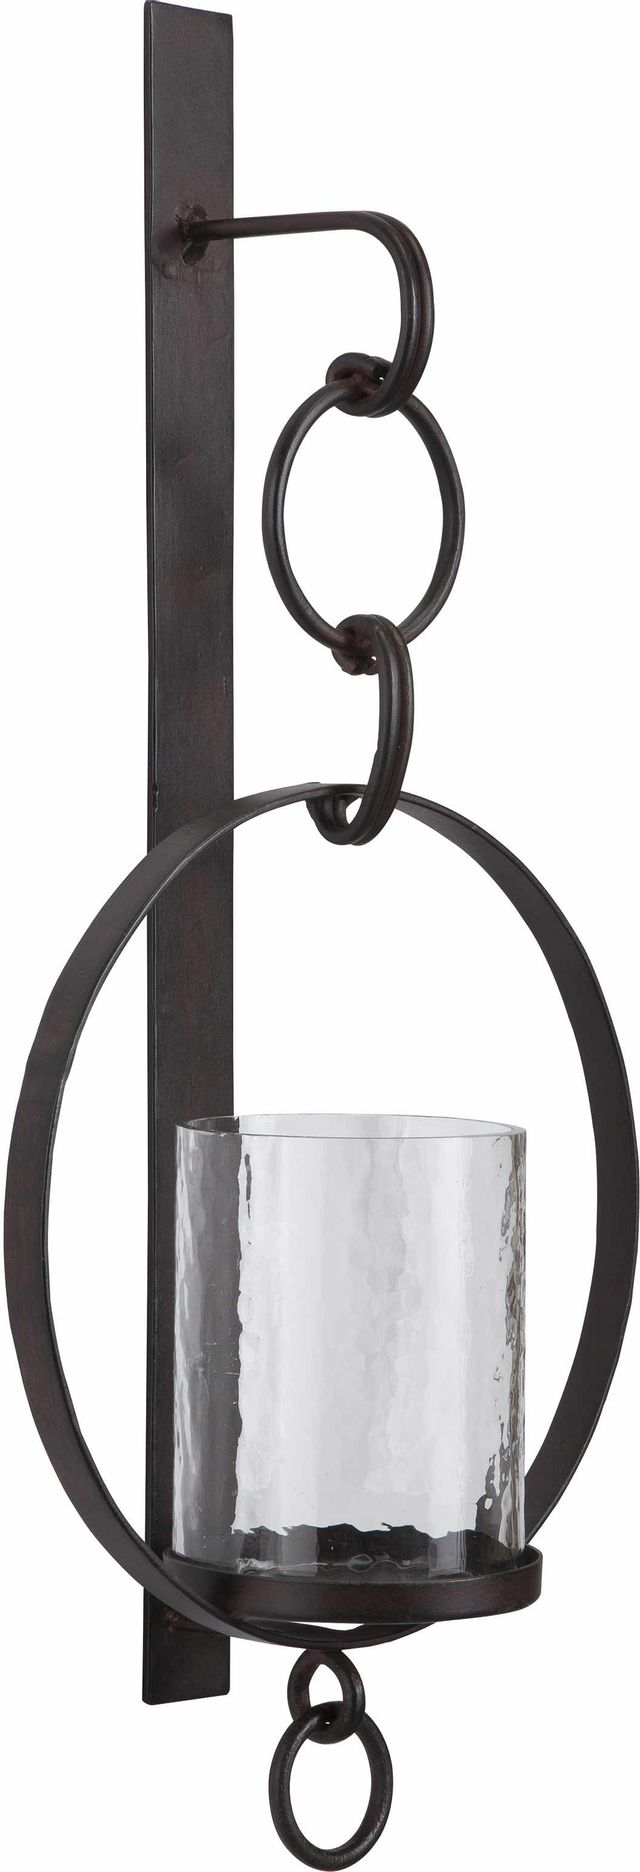 Signature Design by Ashley® Ogaleesha Brown Wall Sconce Candle Holder 0